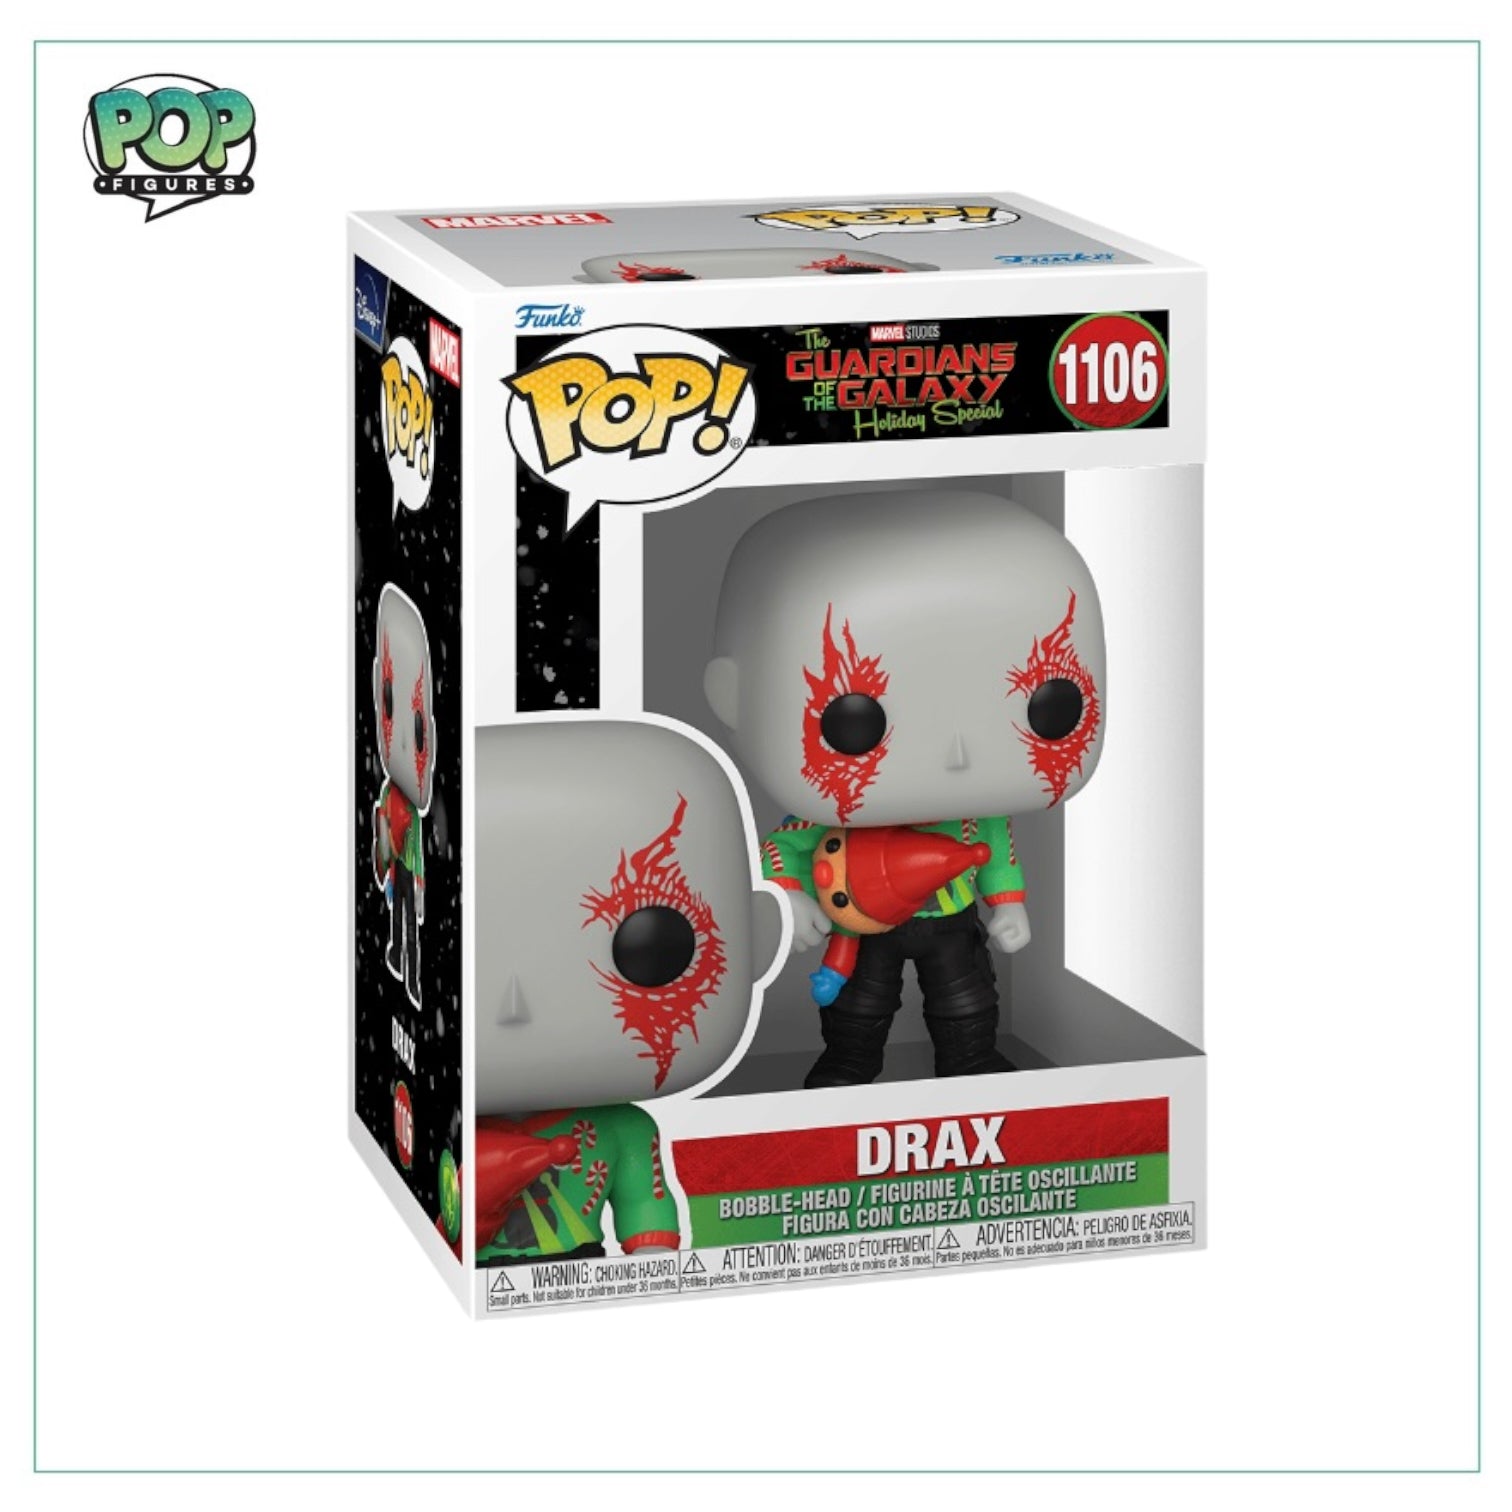 Drax #1106 Funko Pop! - Guardians of the Galaxy Holiday Special